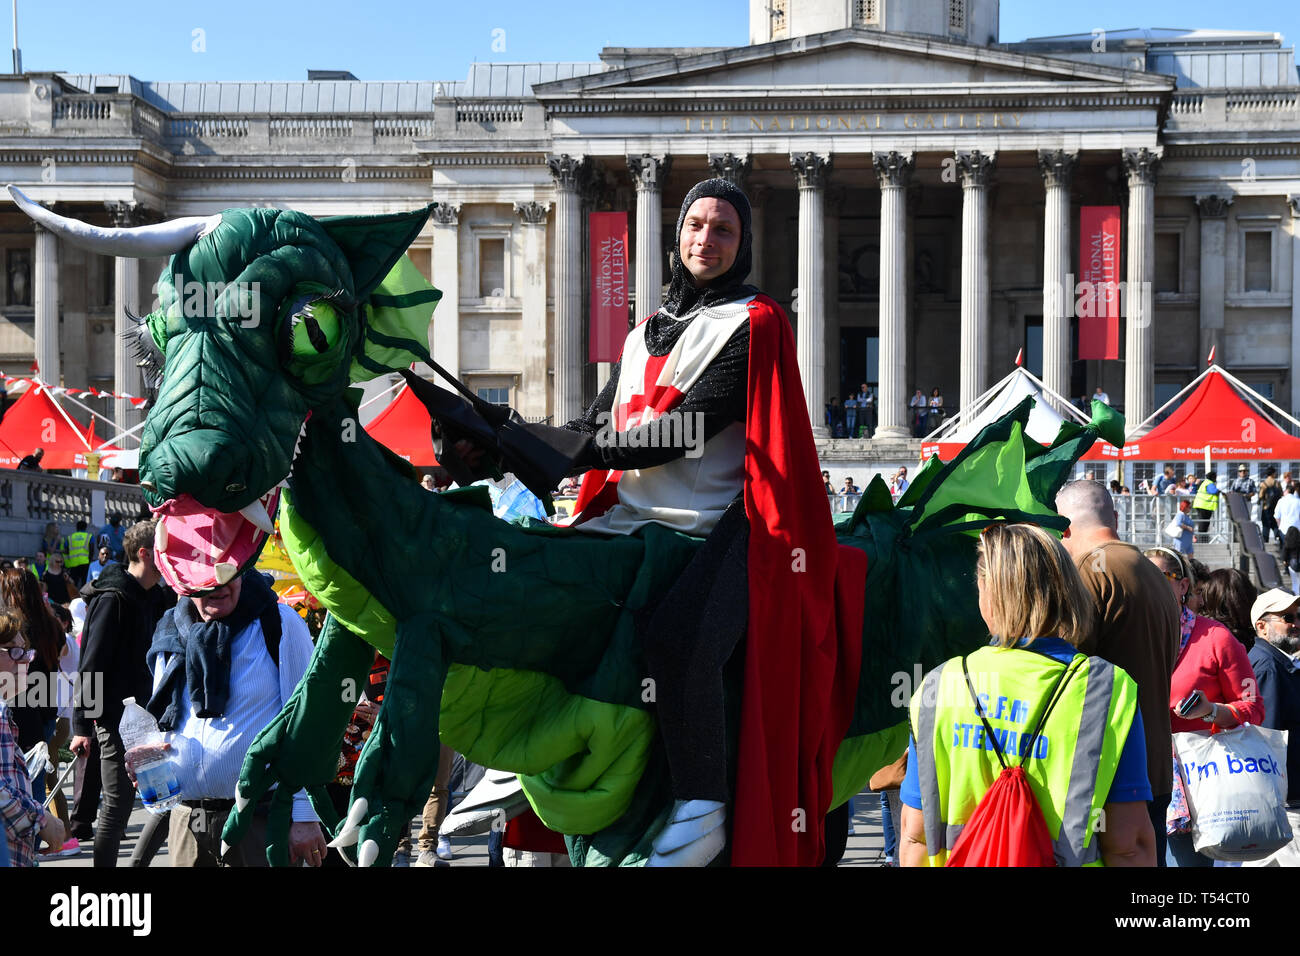 London, UK. 20th April, 2019.London, UK. 20th April, 2019. Hundreds attend the Feast of St George to celebrate English culture with music and English food stalls in Trafalgar Square on 20 April 2019, London, UK. Credit: Picture Capital/Alamy Live News Credit: Picture Capital/Alamy Live News Credit: Picture Capital/Alamy Live News Stock Photo